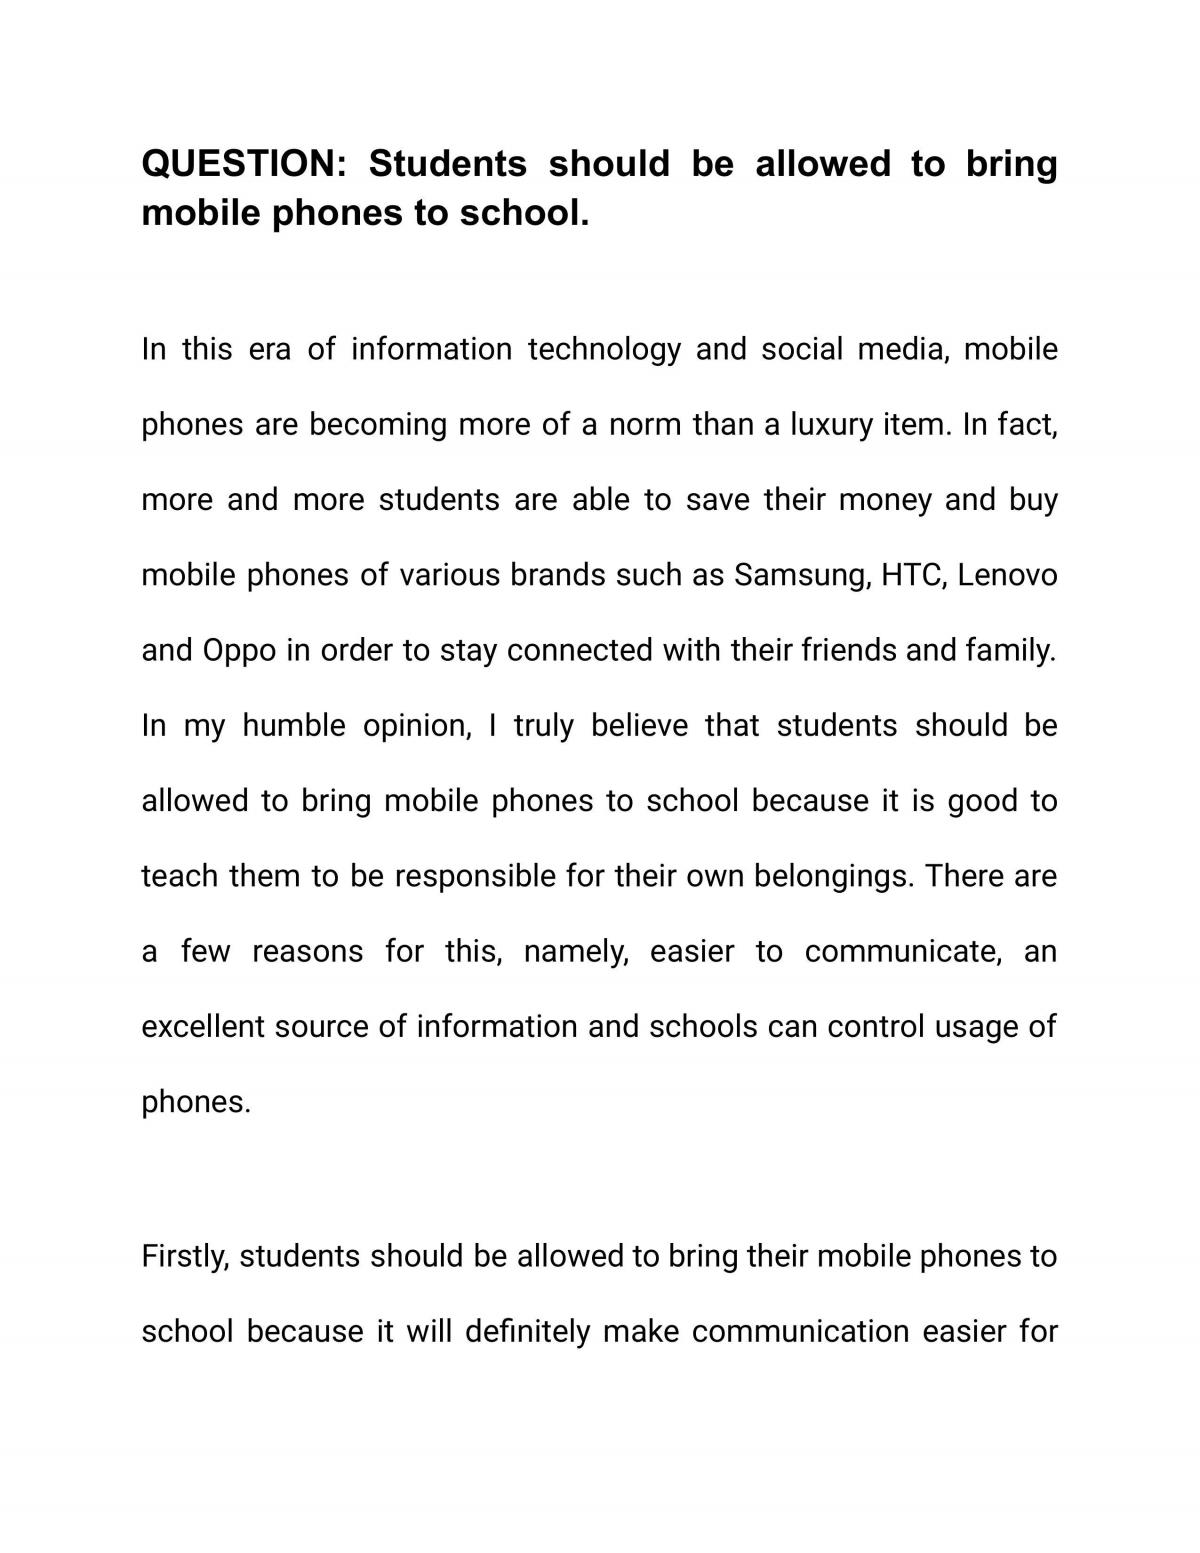 cell phones should be allowed in school essay pdf